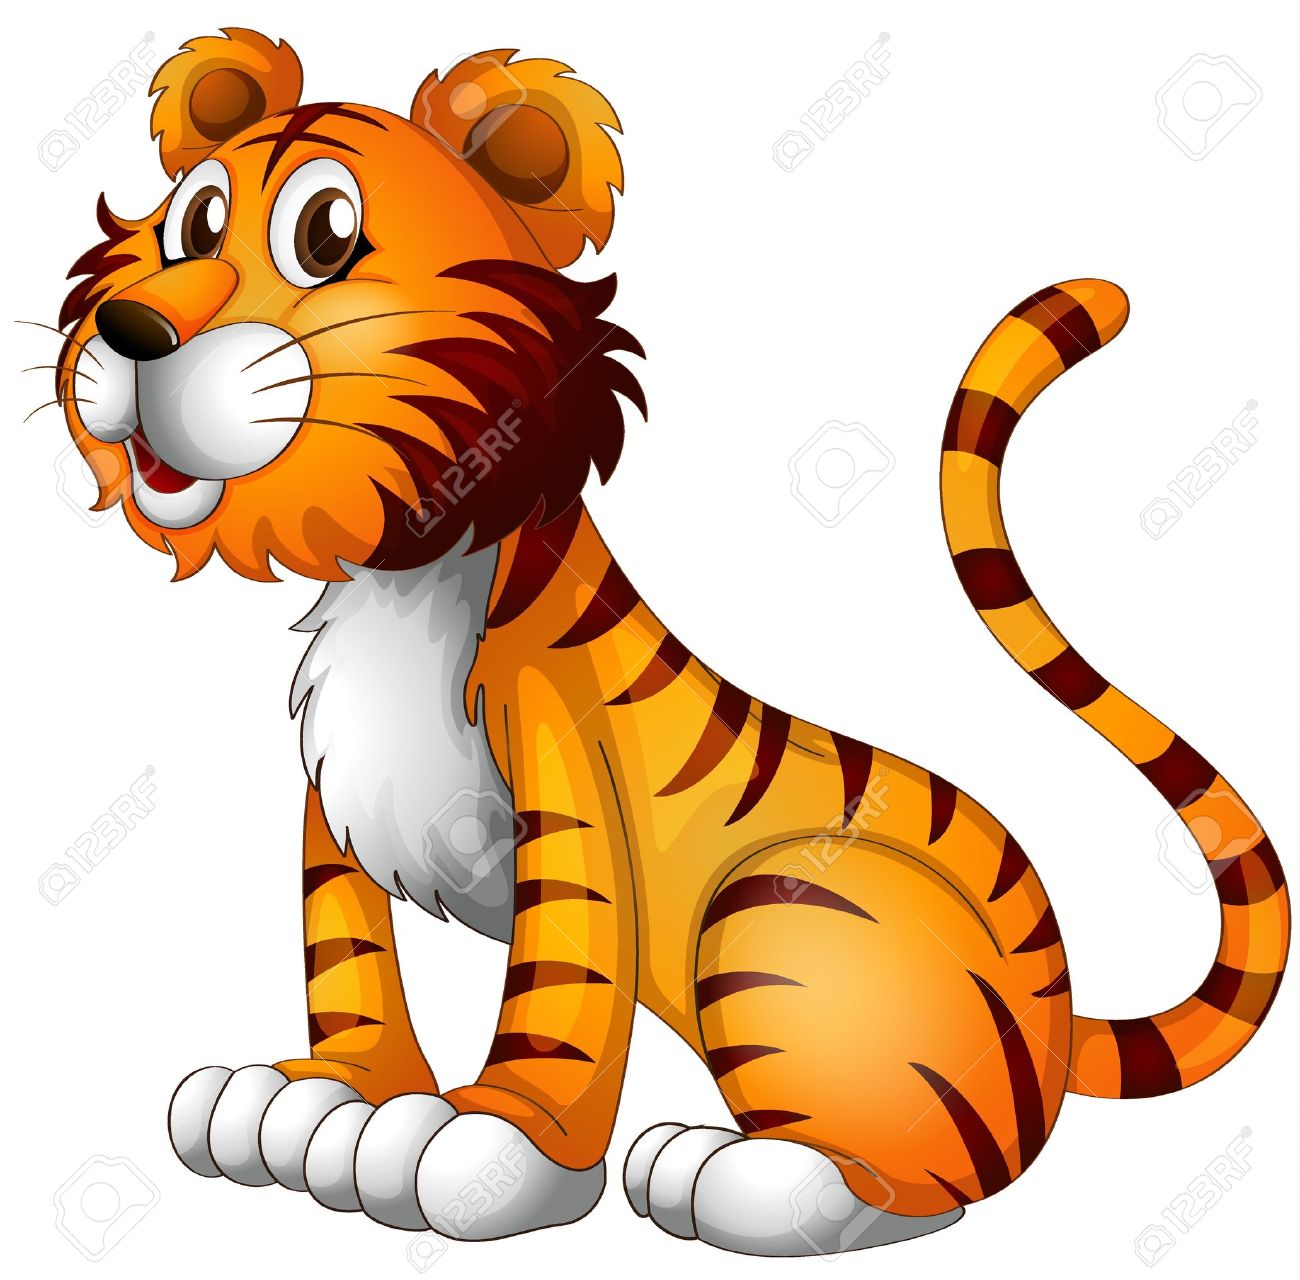 Tigres clipart #17, Download drawings